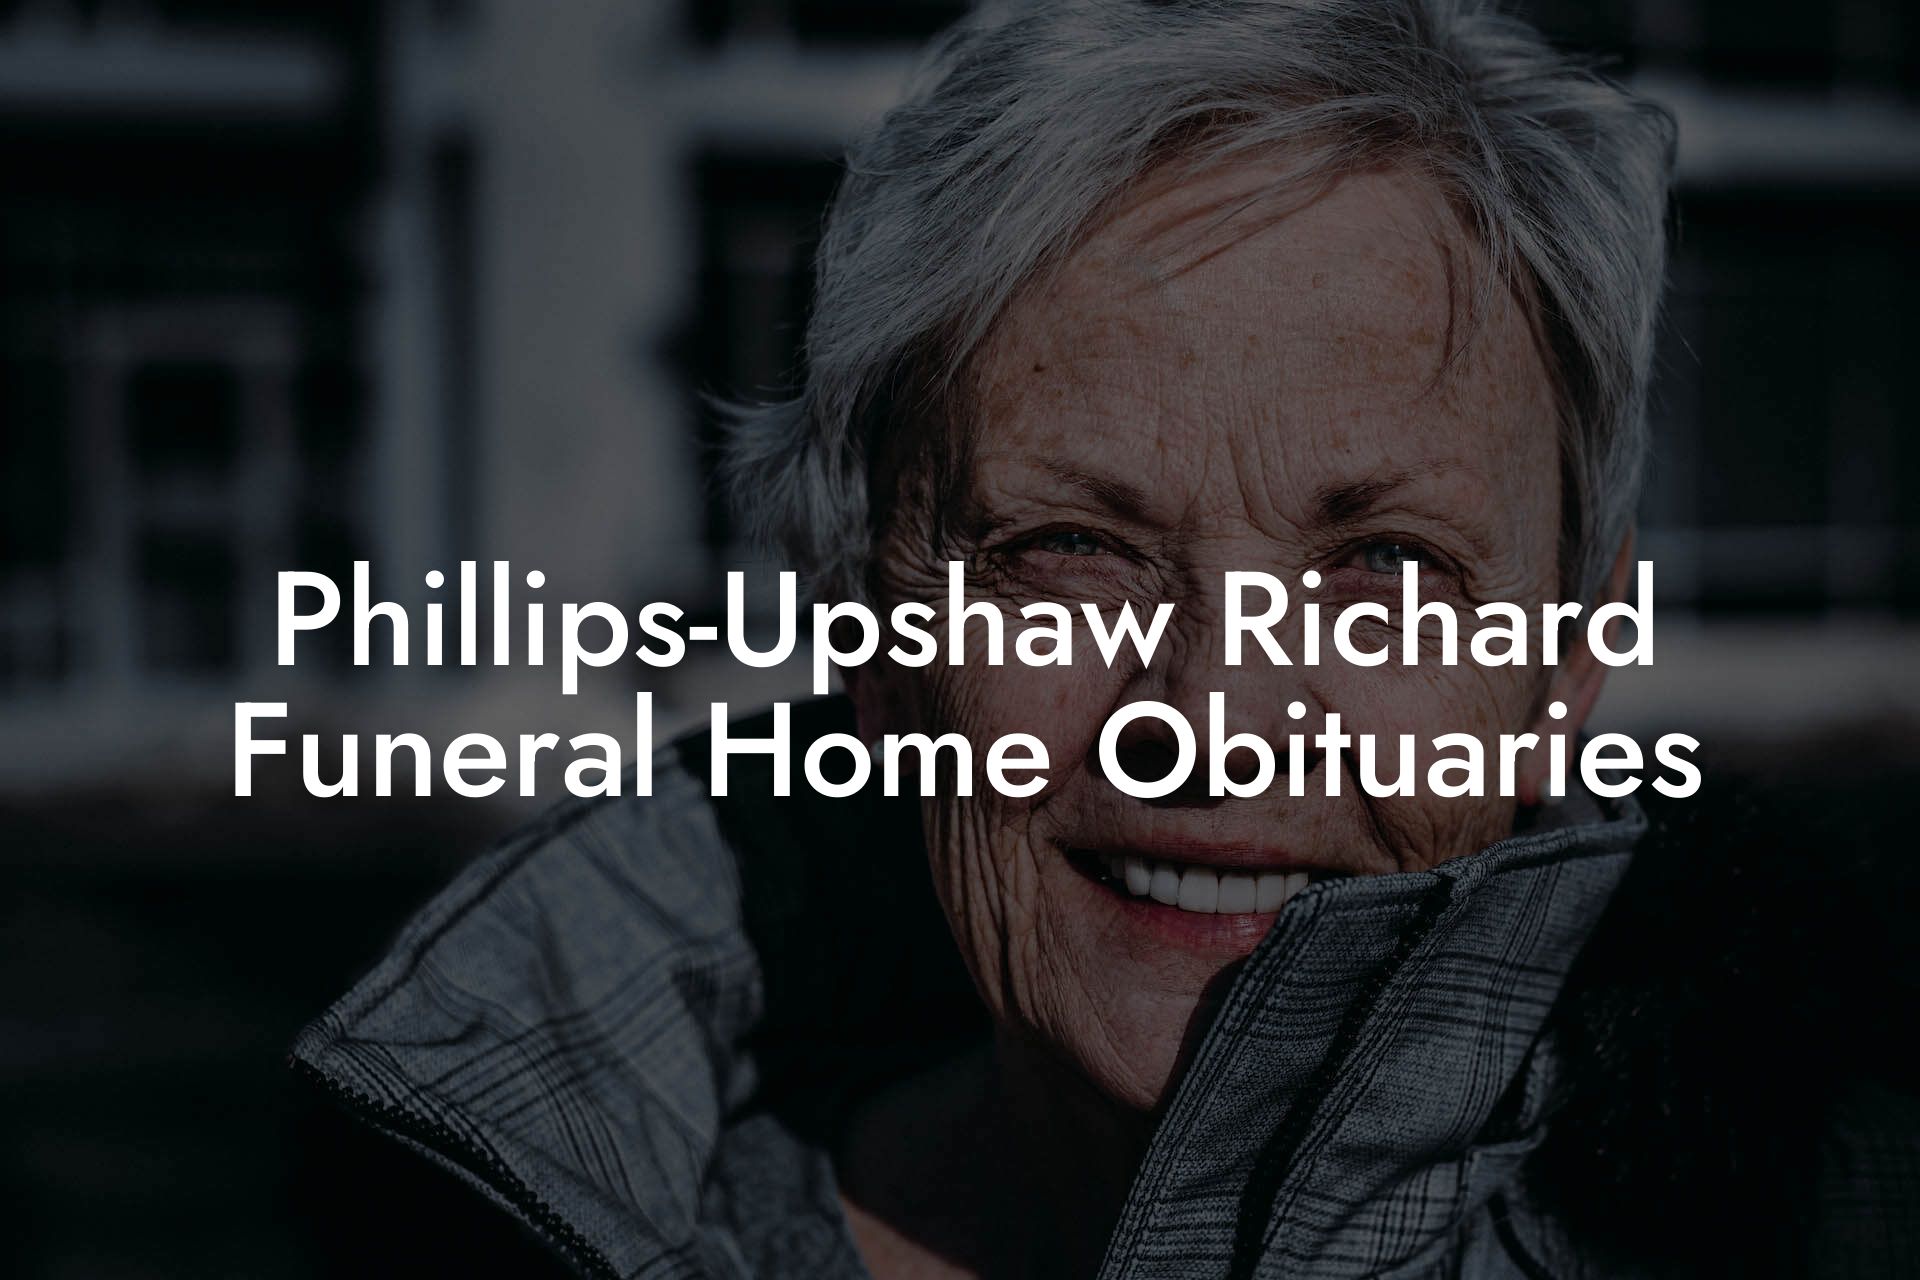 Phillips-Upshaw Richard Funeral Home Obituaries